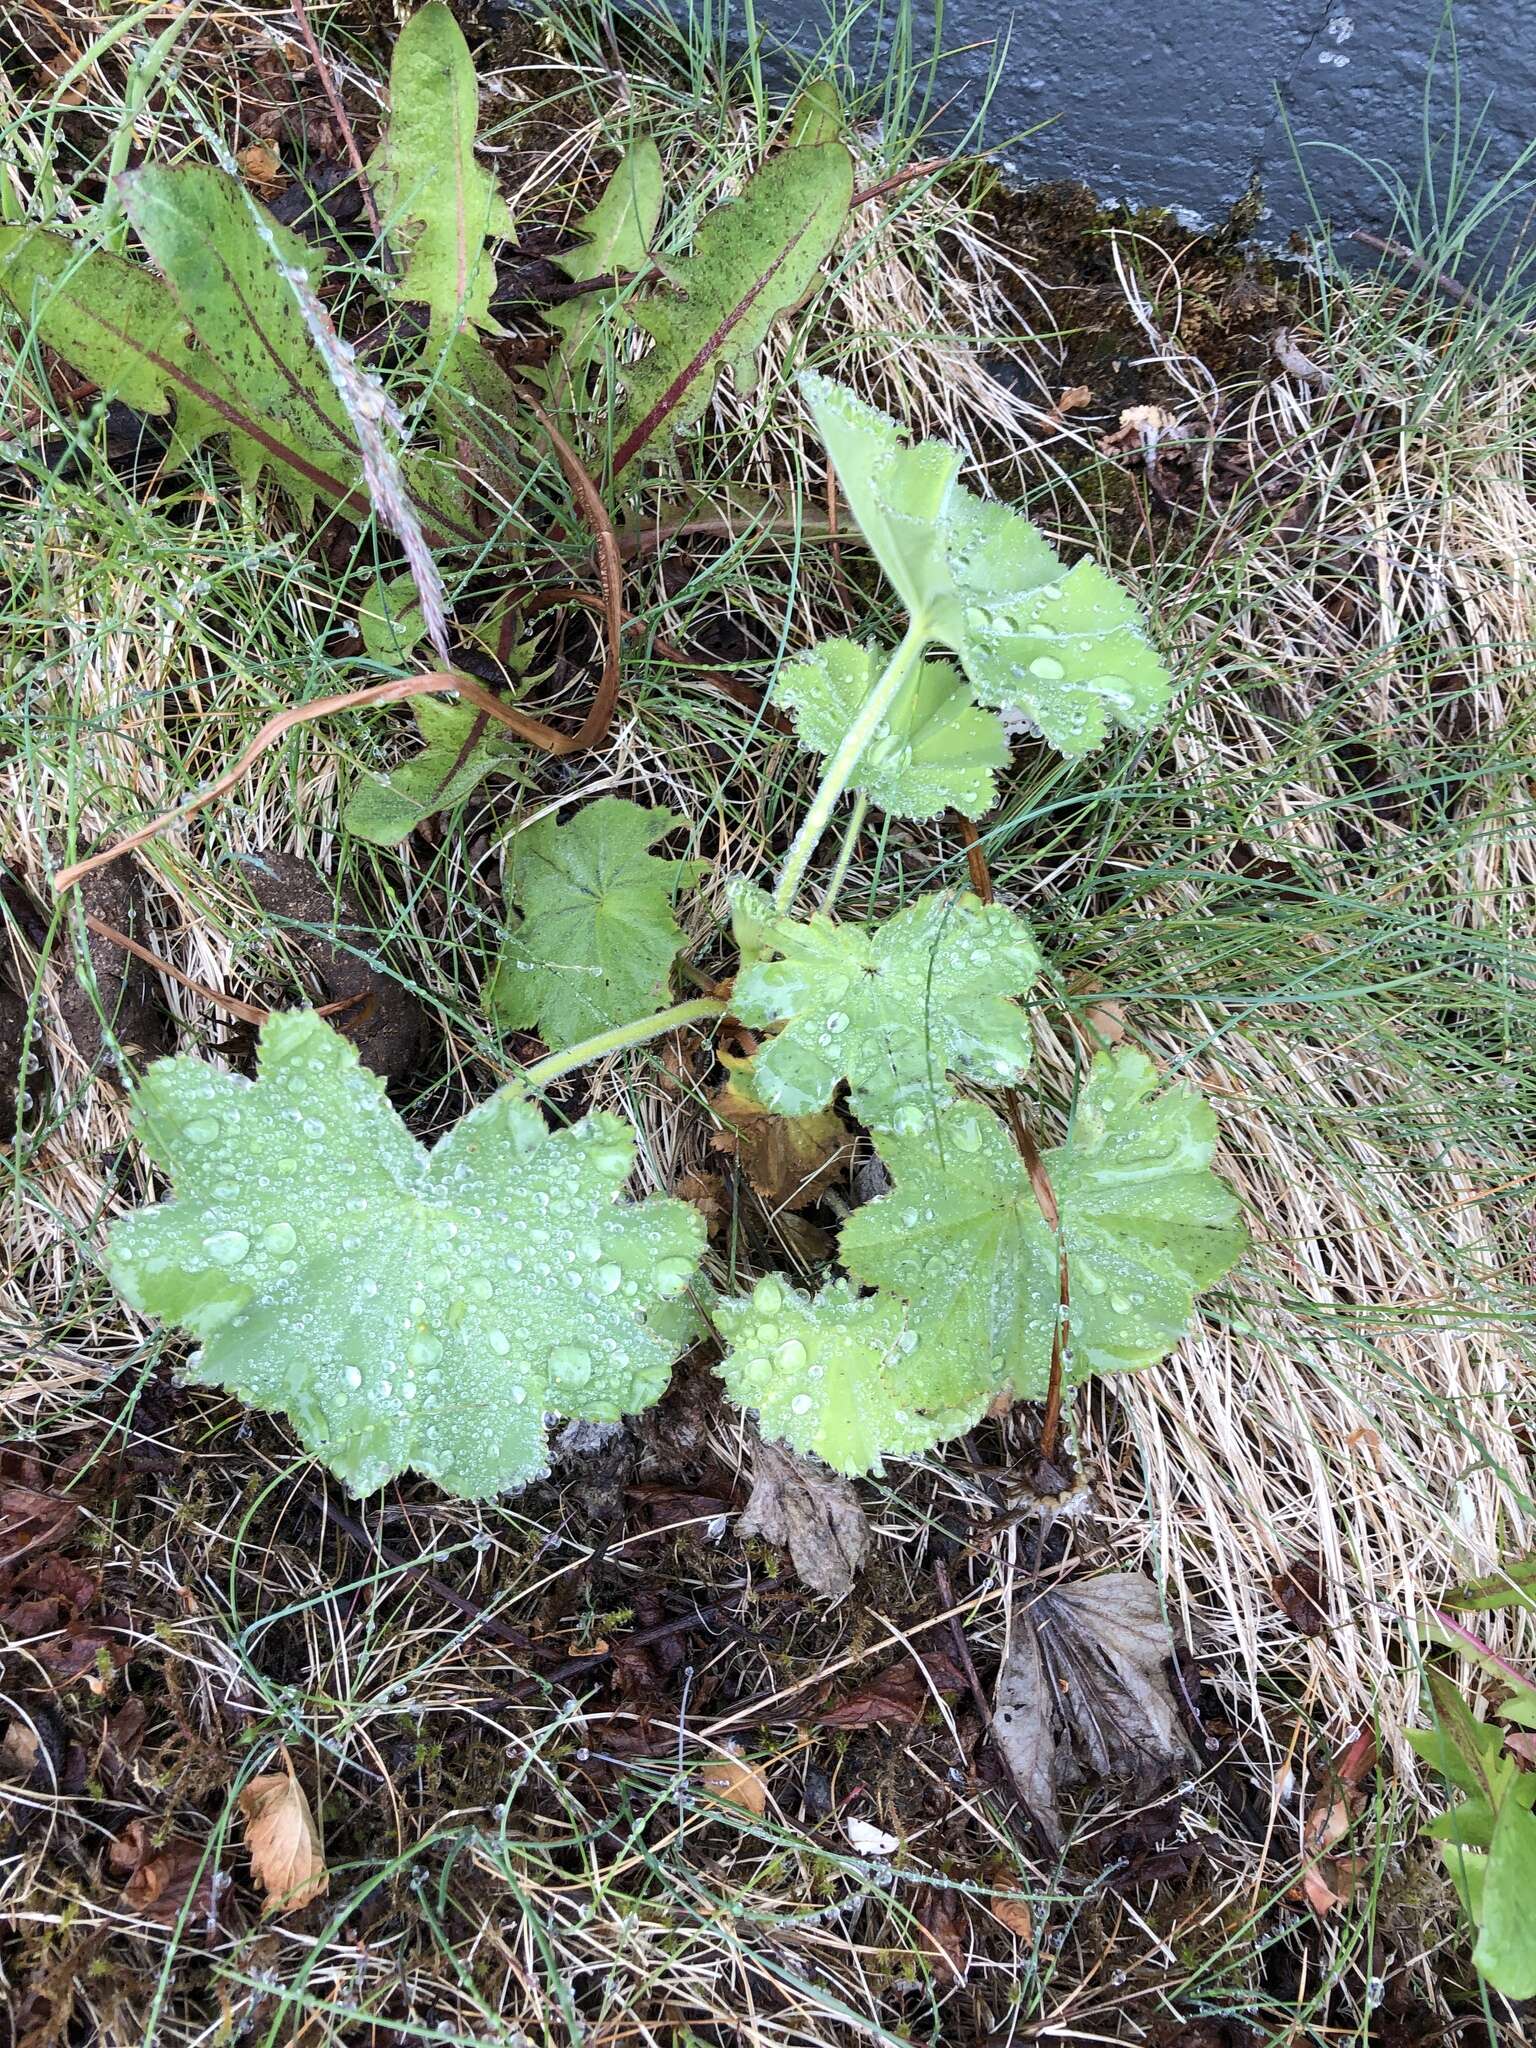 Image of Lady's Mantle